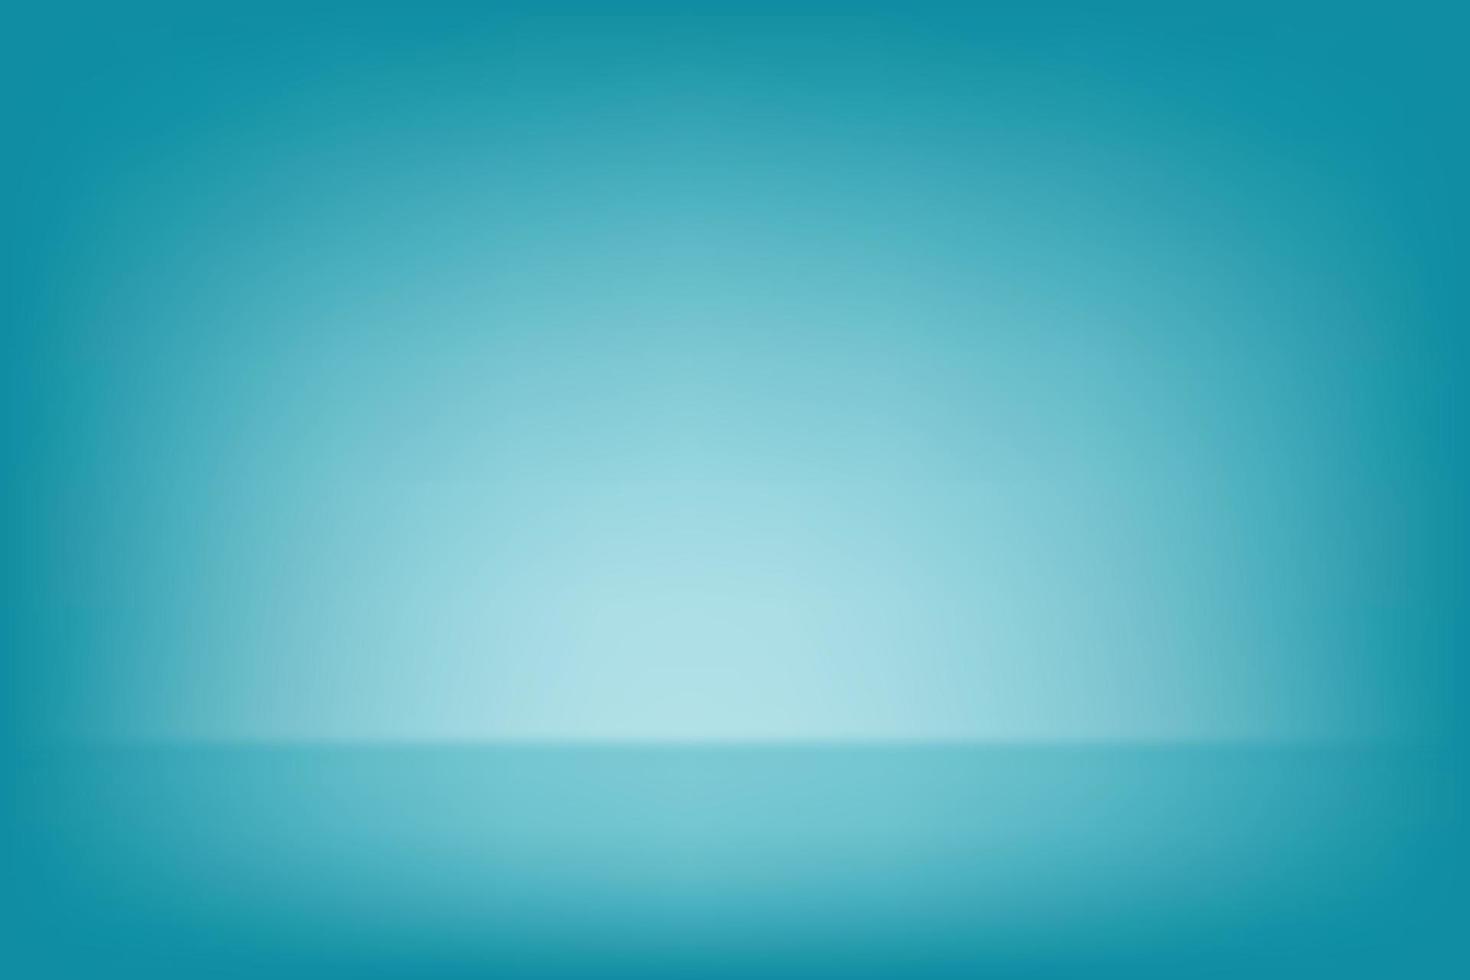 Free vector podium product display background